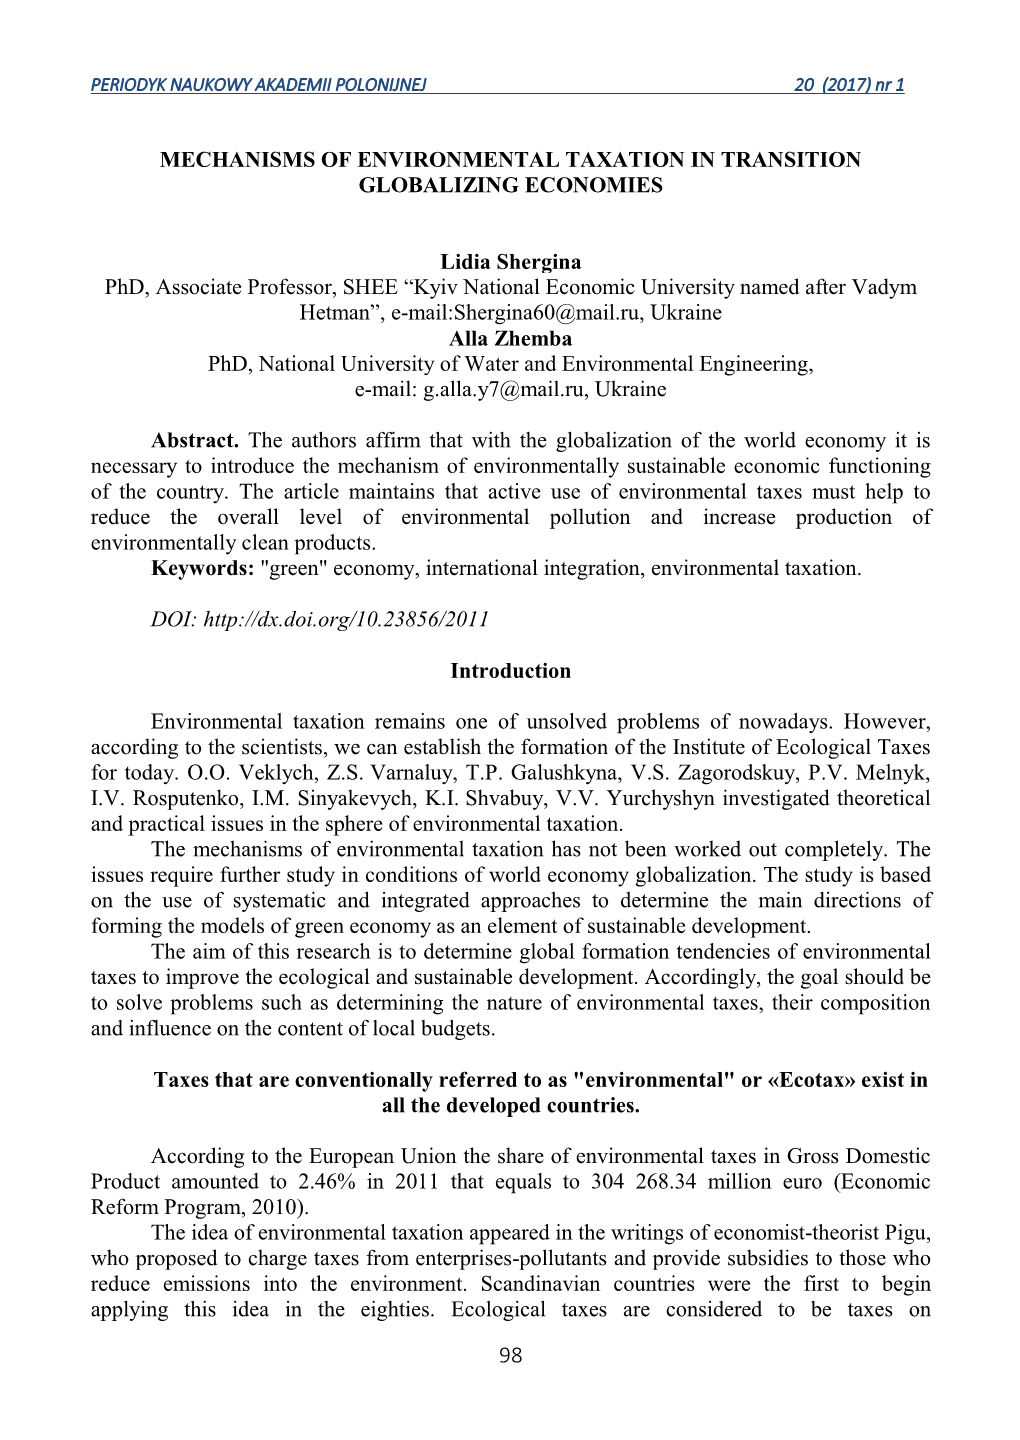 Mechanisms of Environmental Taxation in Transition Globalizing Economies